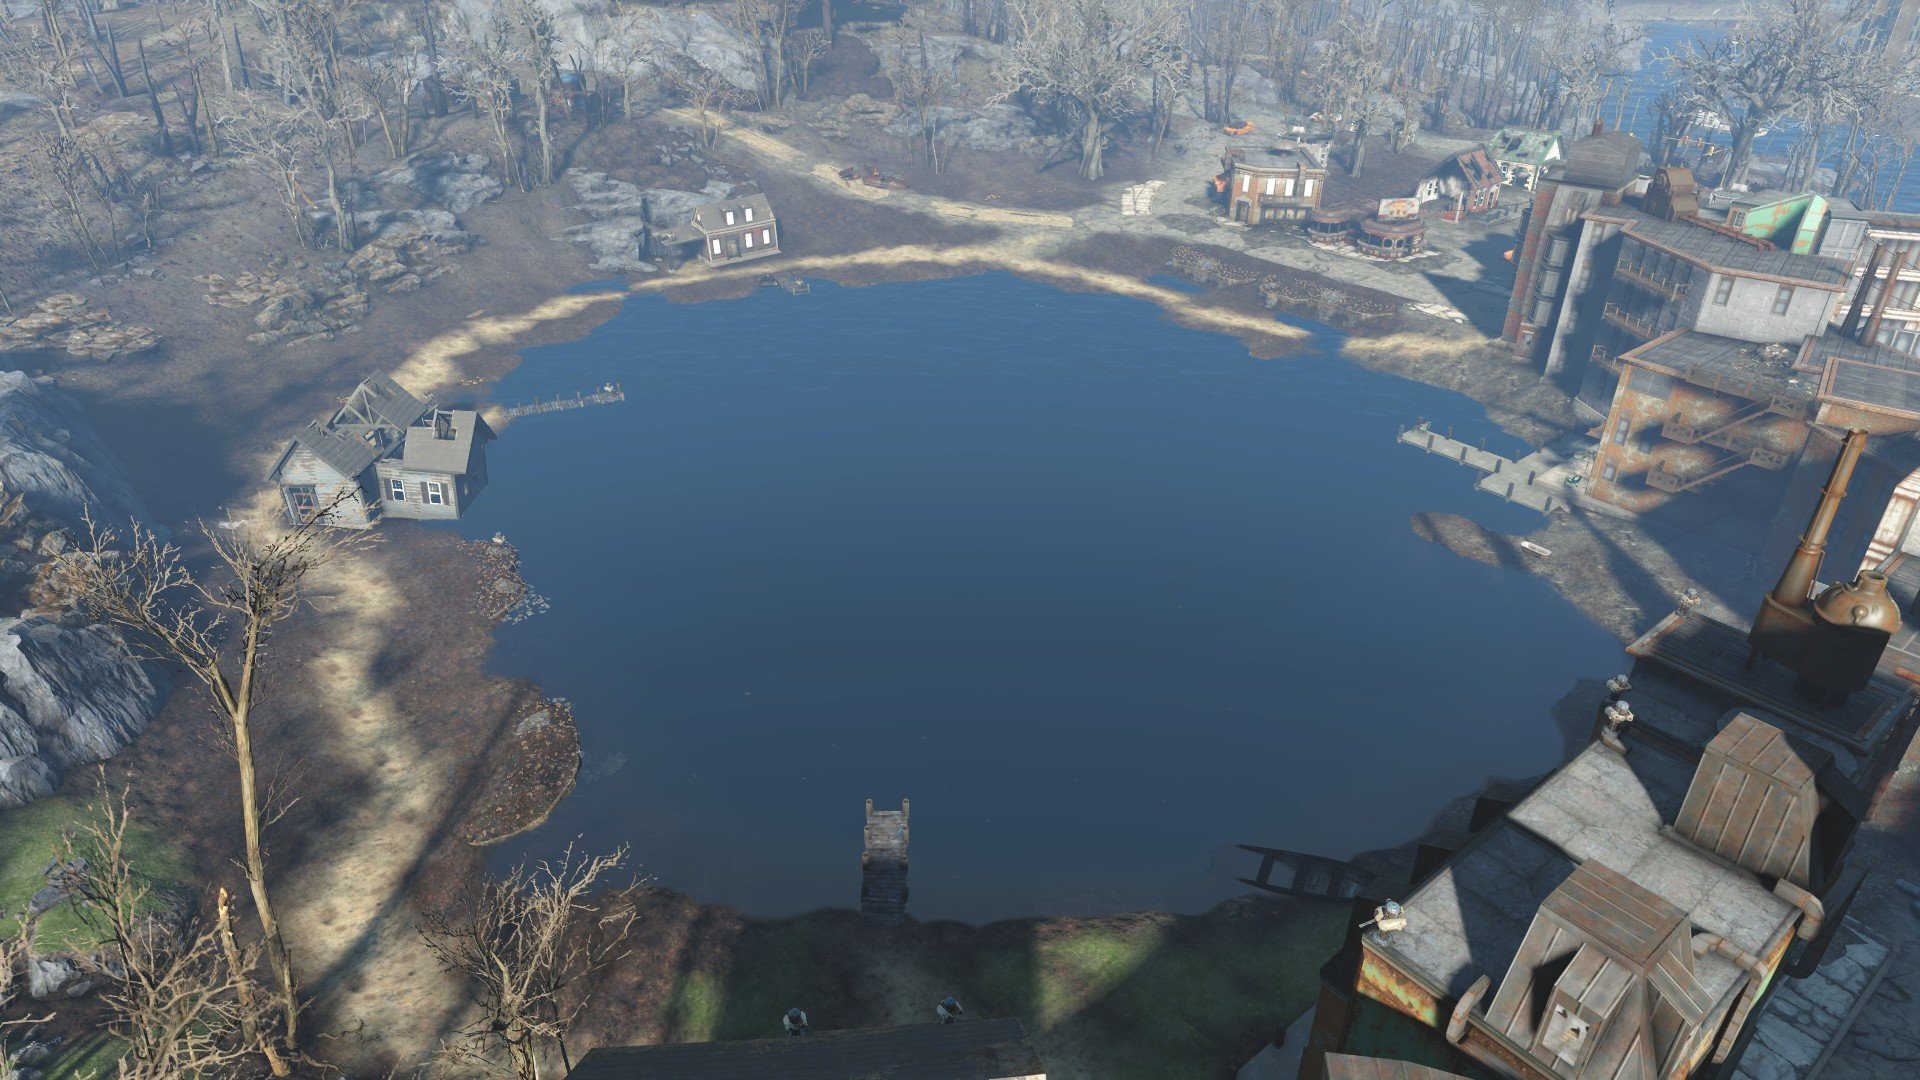 Conquest build new settlements and camping fallout 4 на русском фото 34